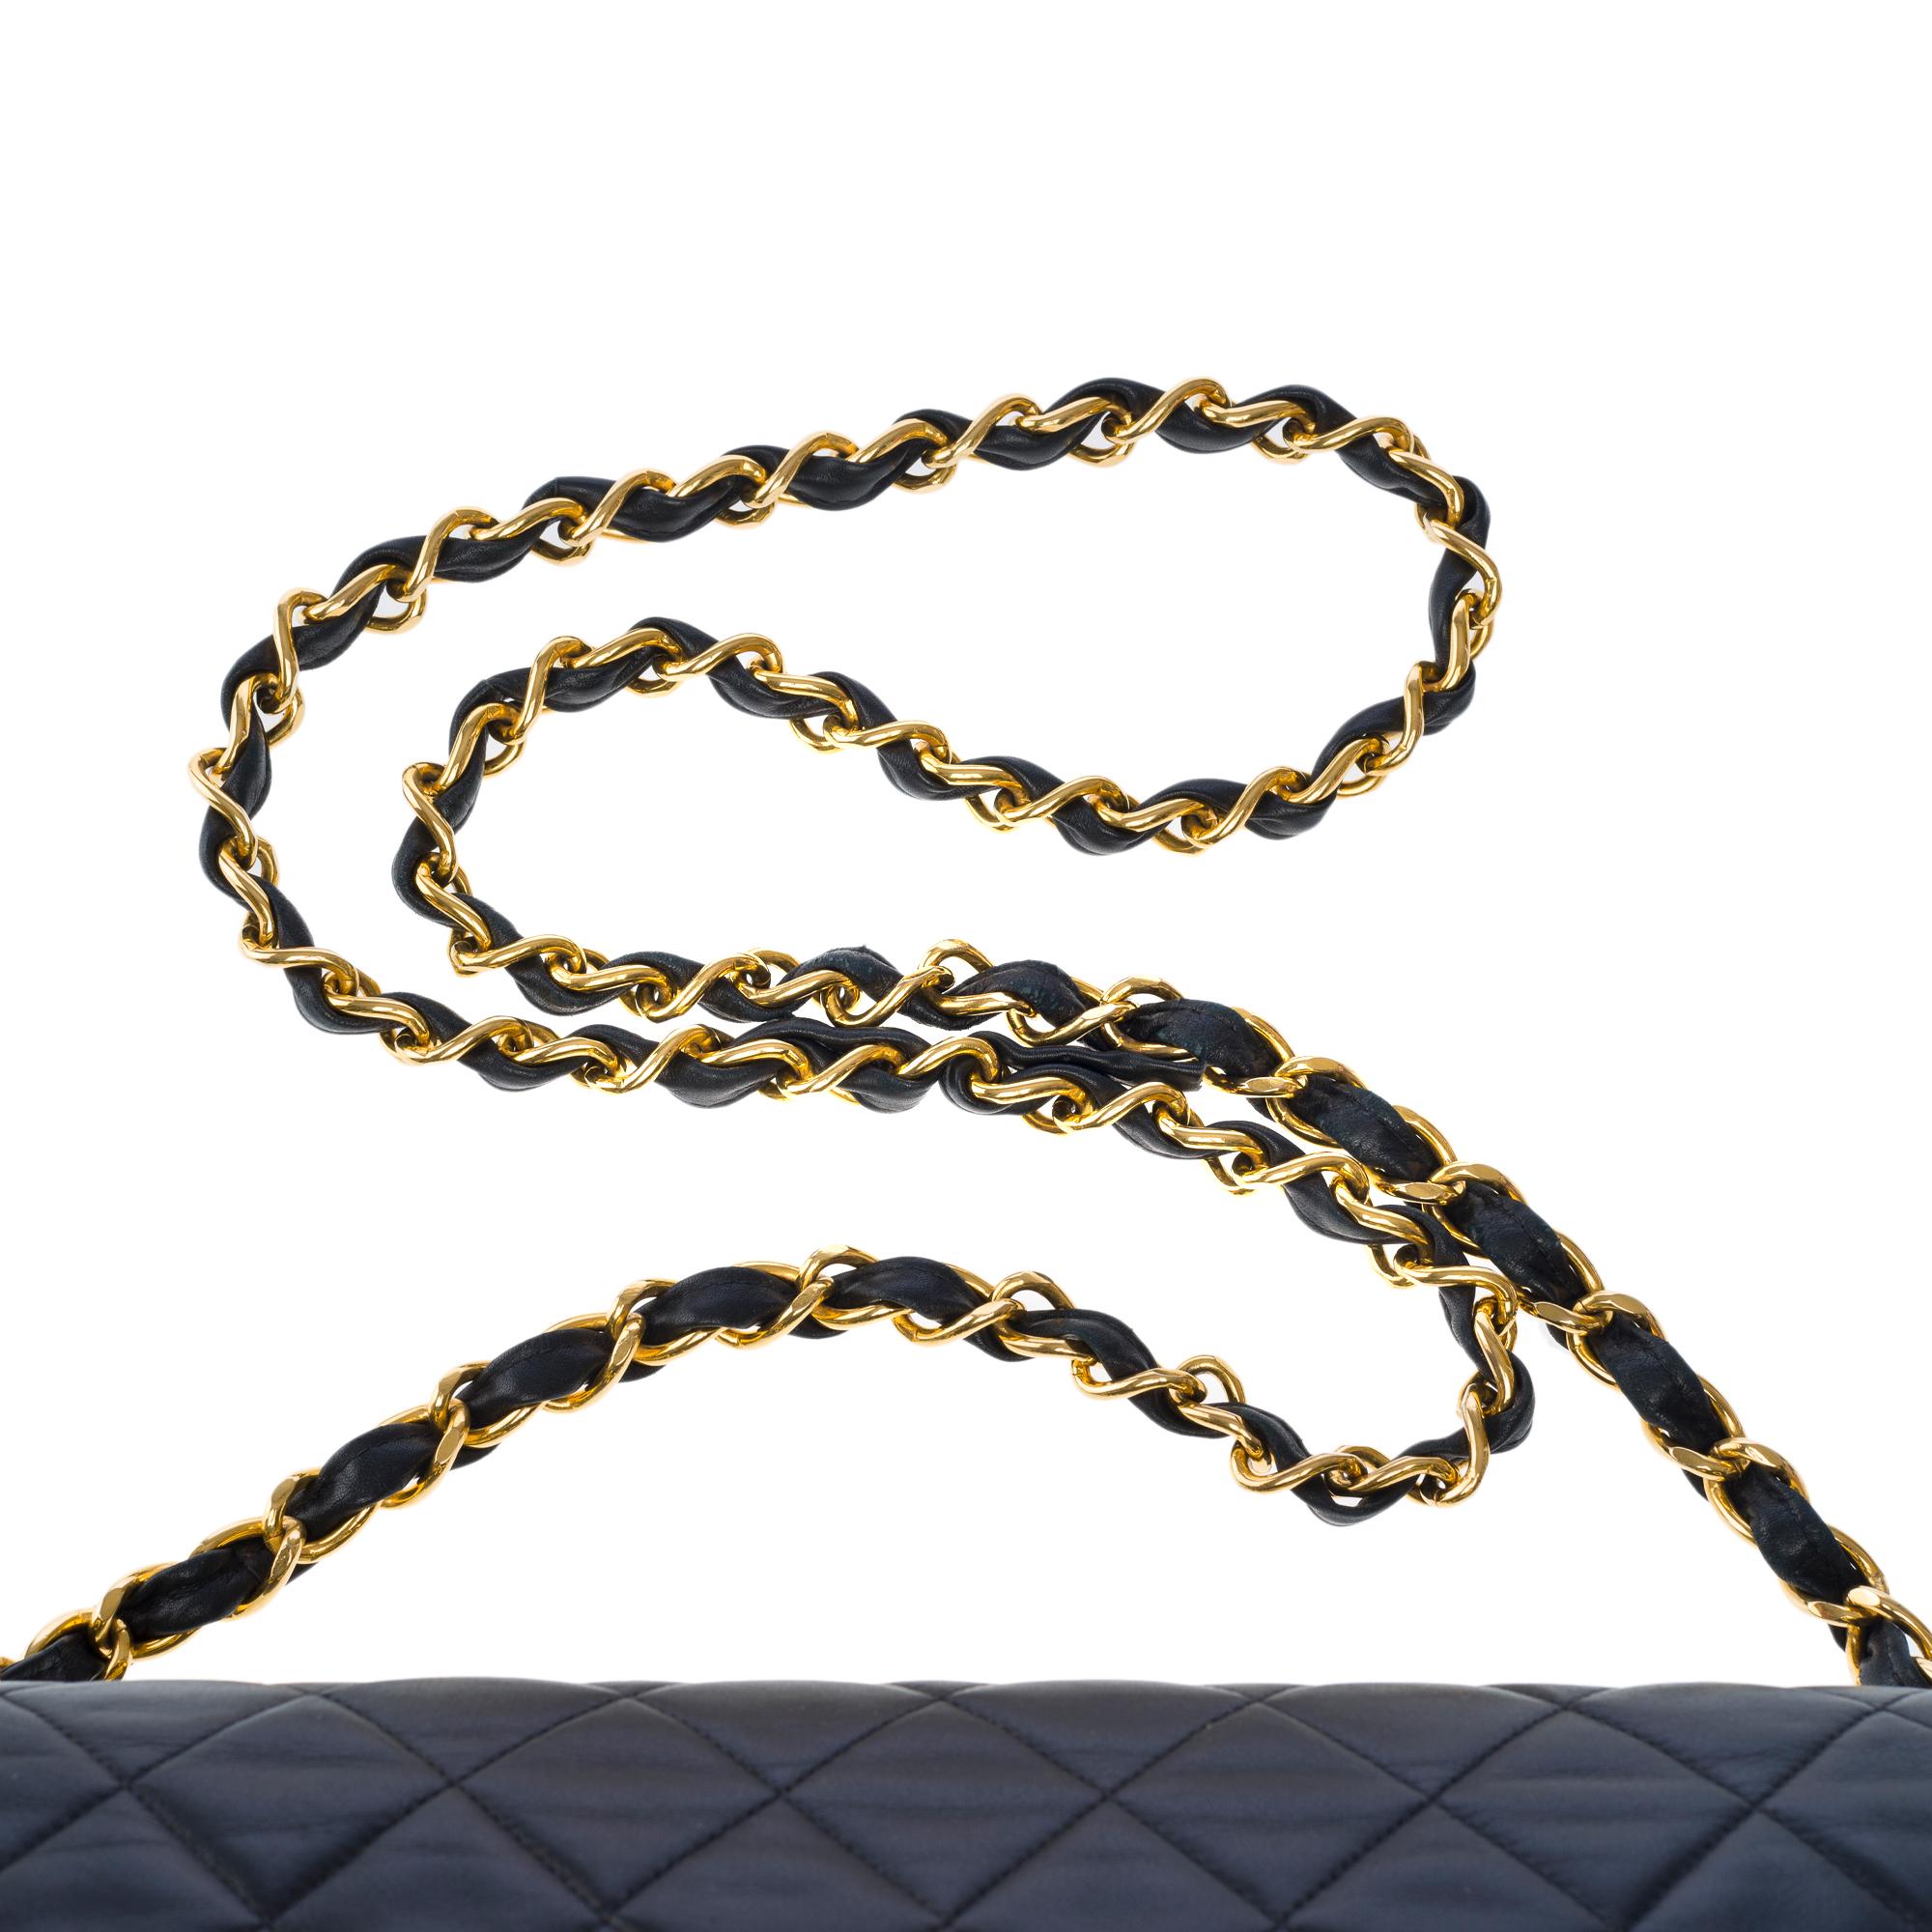 Chanel Timeless Maxi Jumbo flap shoulder bag in black quilted lambskin, GHW For Sale 4